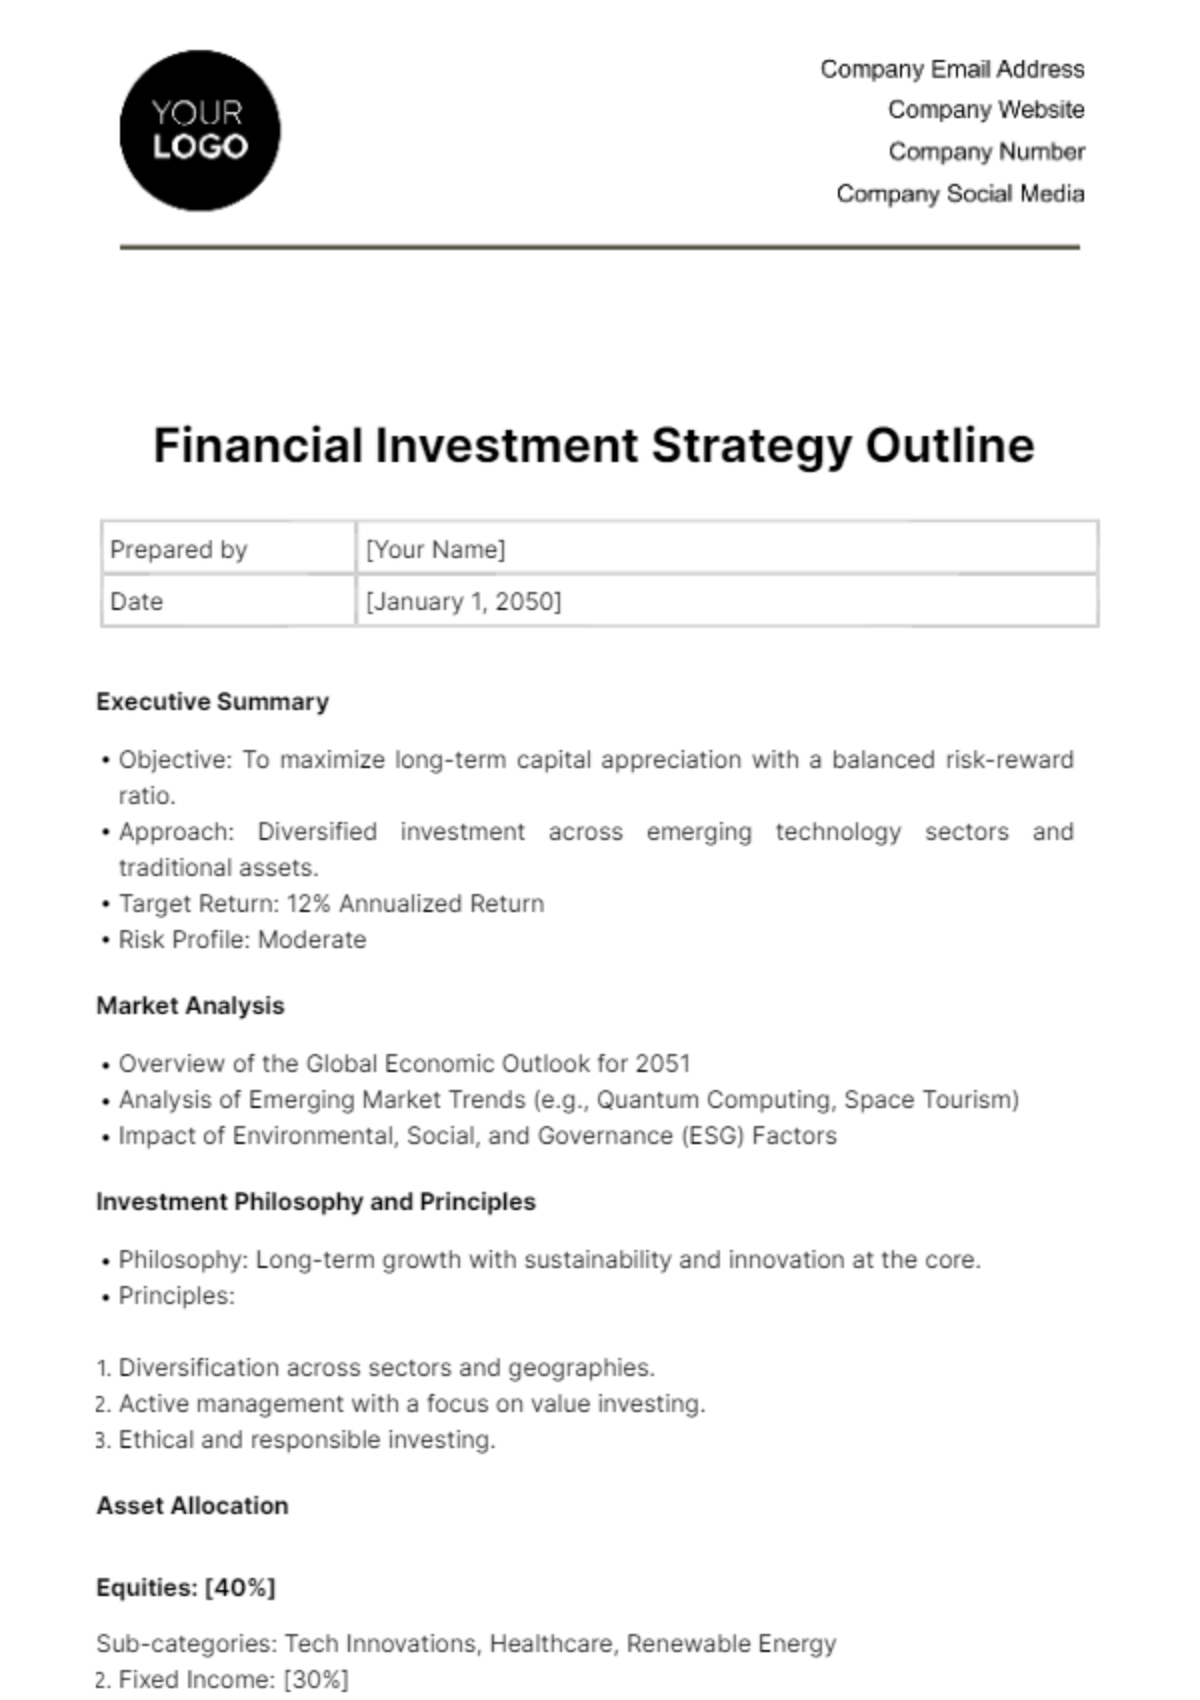 Free Financial Investment Strategy Outline Template